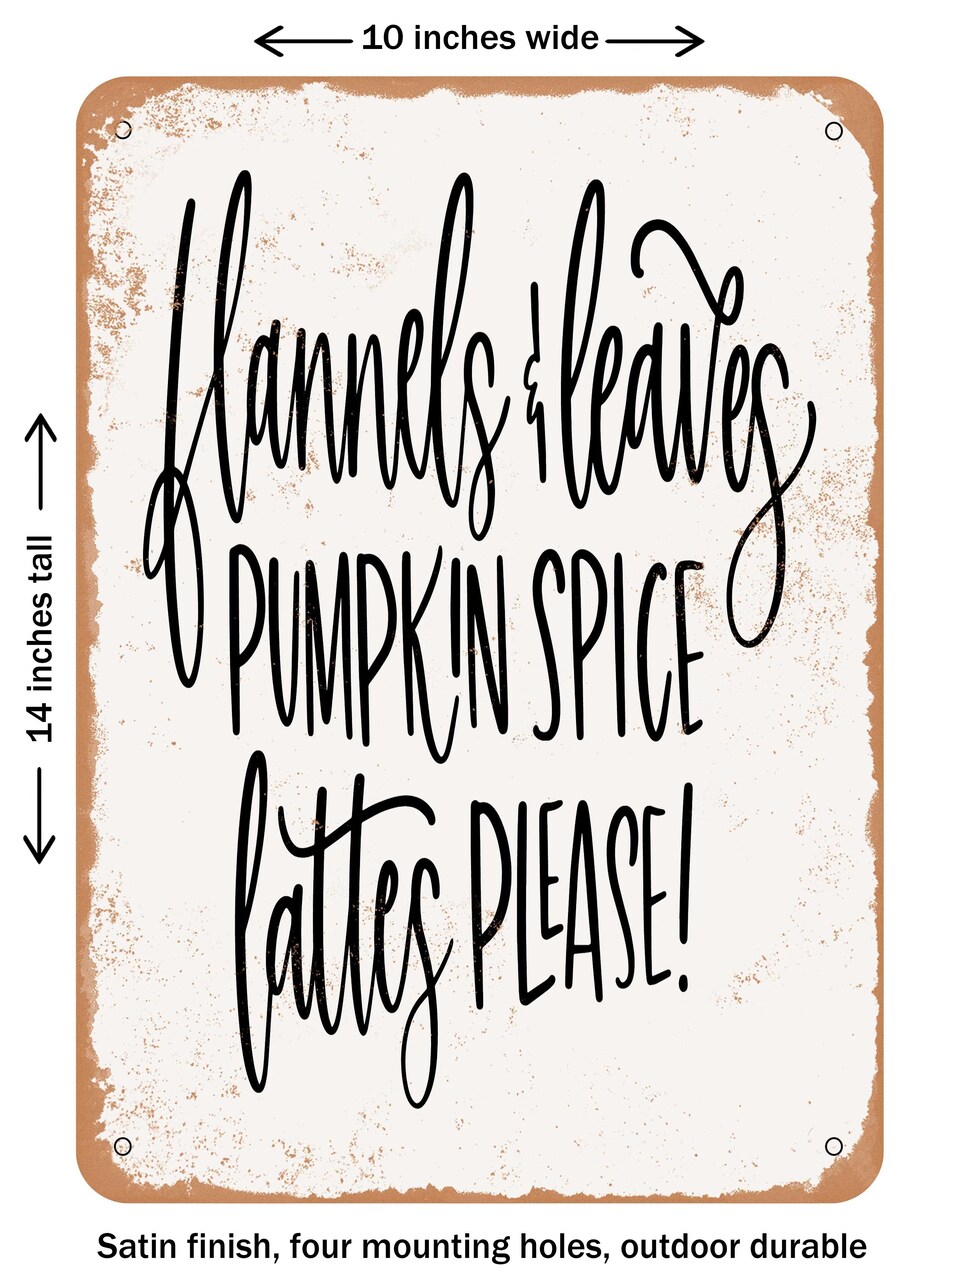 DECORATIVE METAL SIGN - Flannels and Leaves Pumpkin Spice Lattes Please  - Vintage Rusty Look